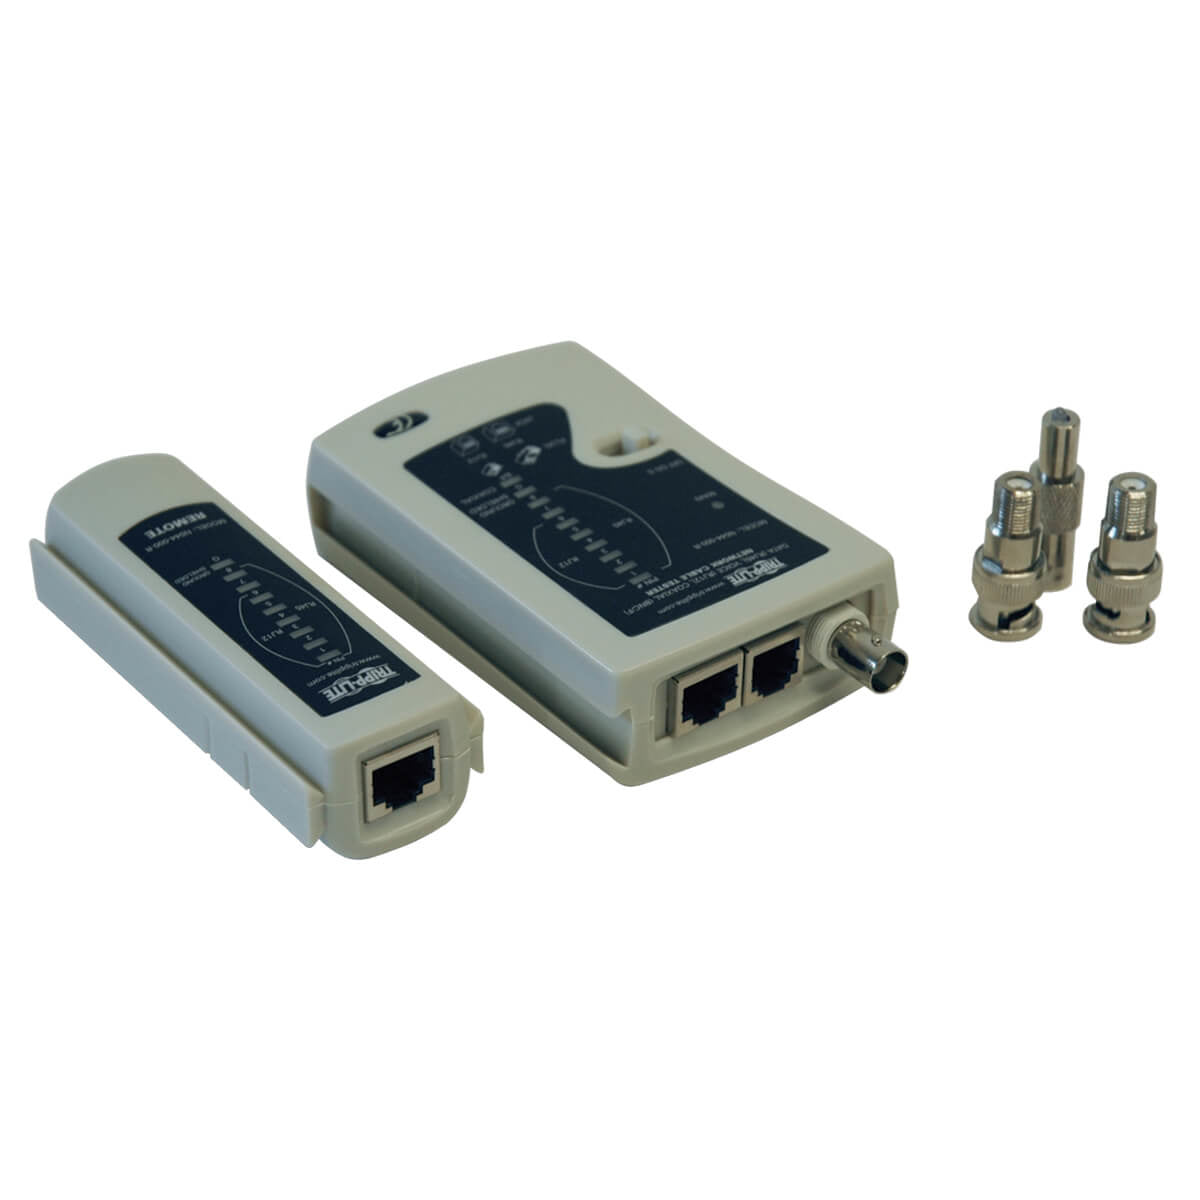 N044-000-R Network Cable Continuity Tester for Cat5/Cat6